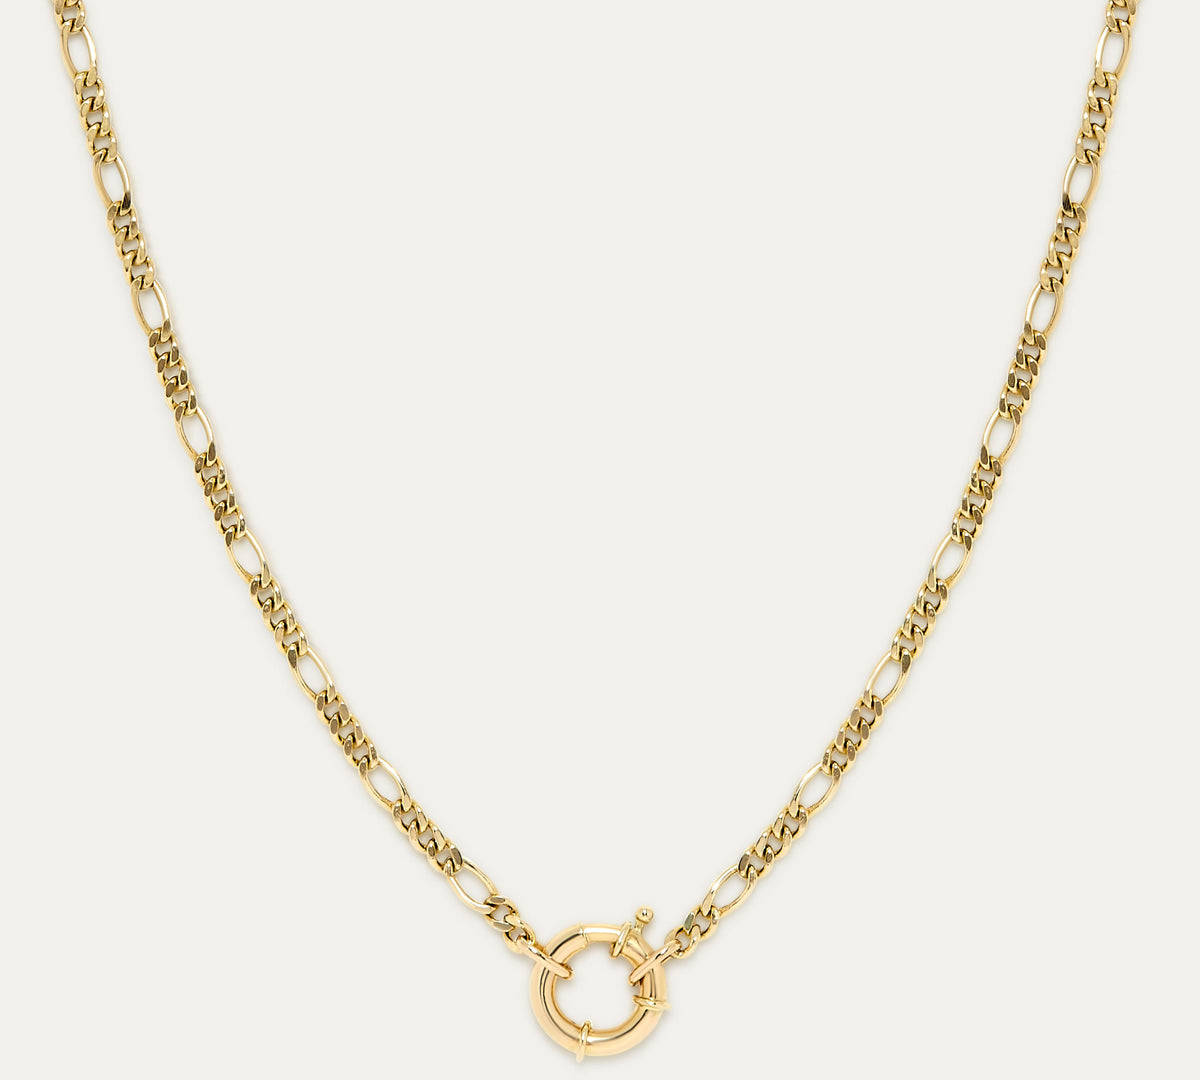 Figaro Chain Necklace | Circle Chain Necklace | MONTENERI JEWELRY